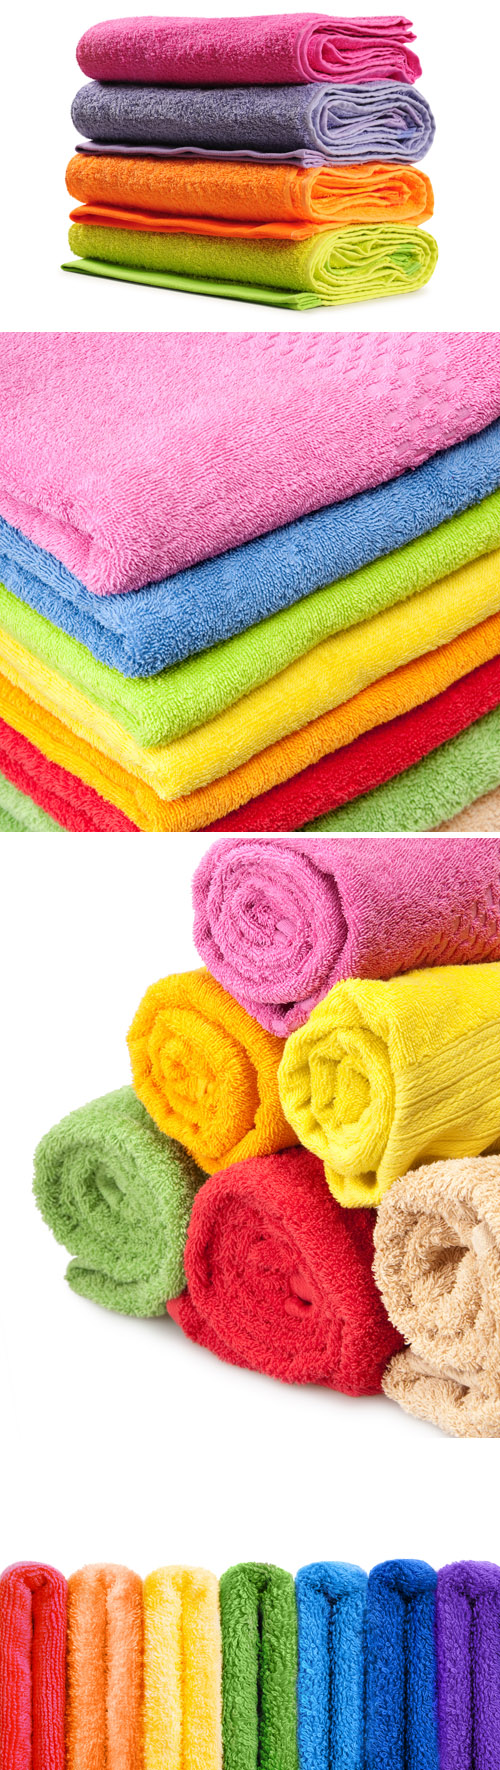 Stock Photos - Color Towels